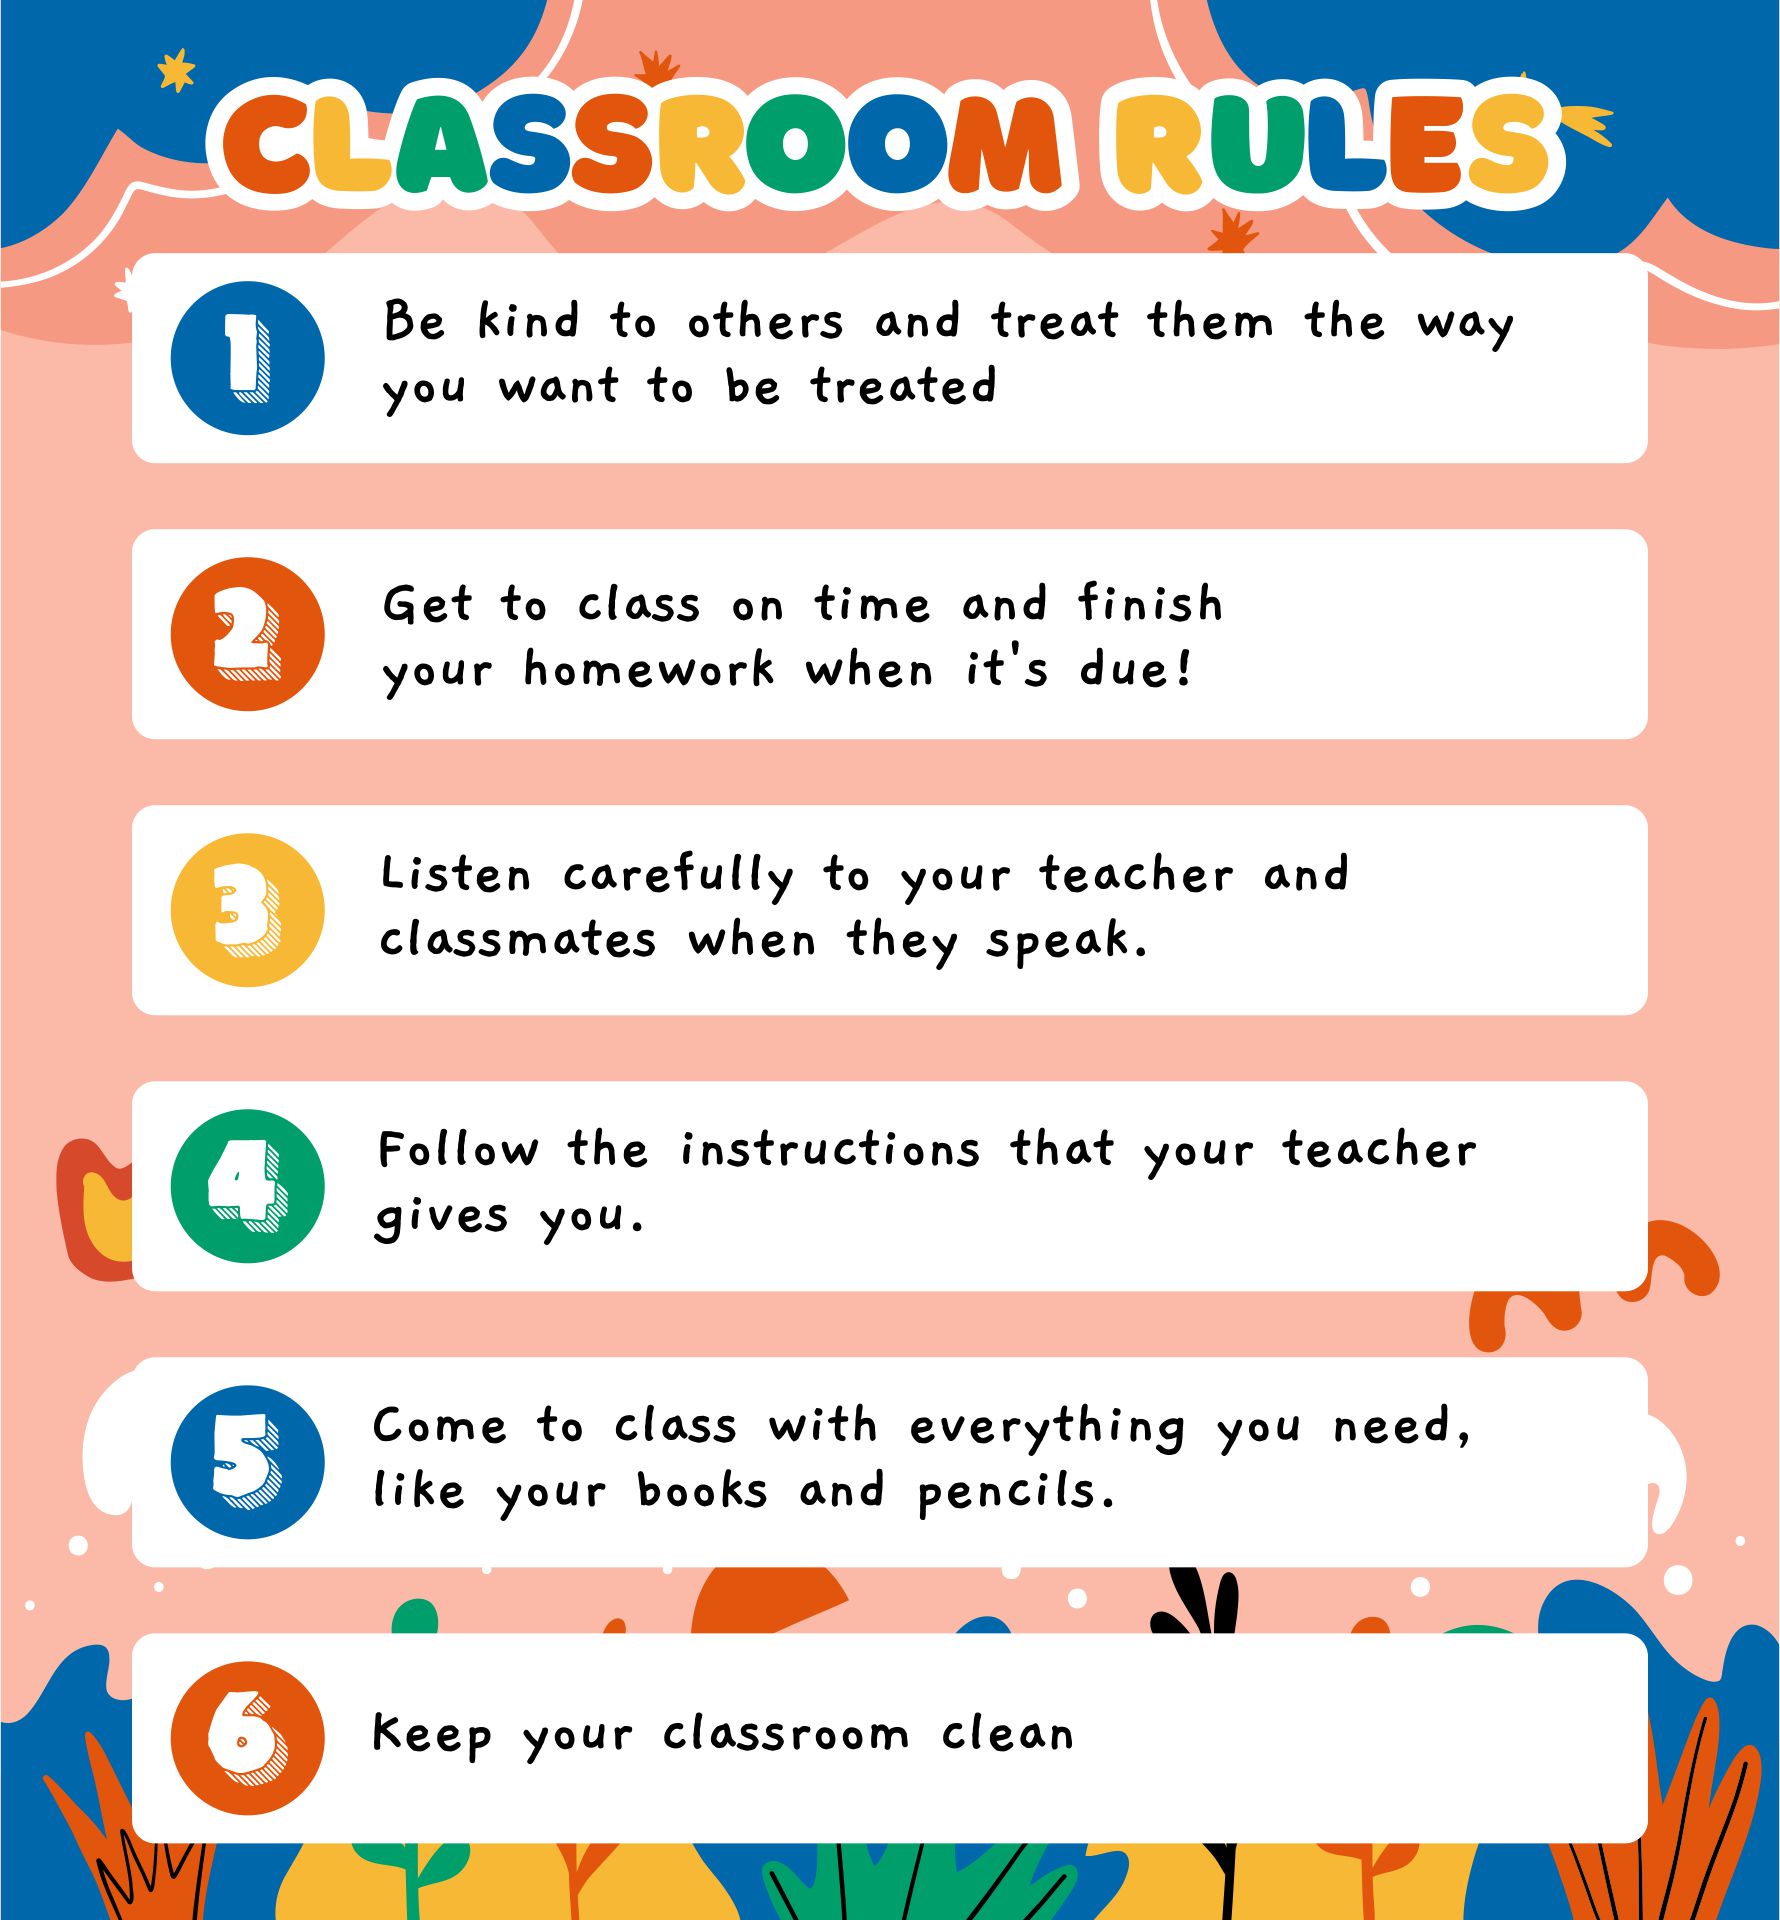 5-best-images-of-free-teacher-printables-classroom-rules-printable